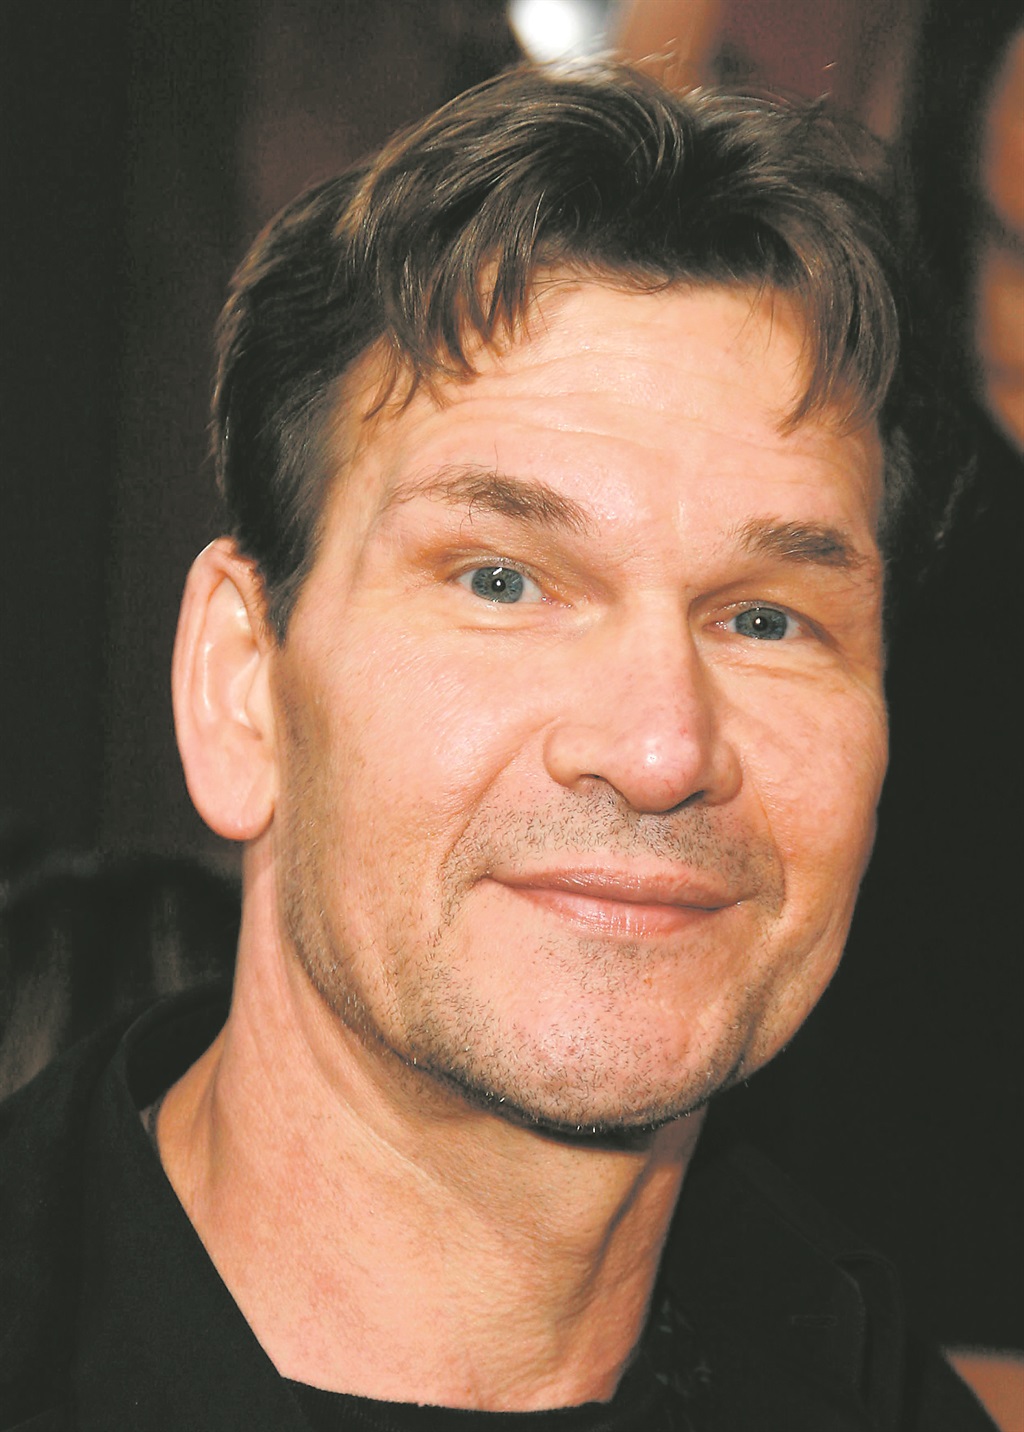 Patrick Swayze, who died in 2009 from pancreatic cancer.